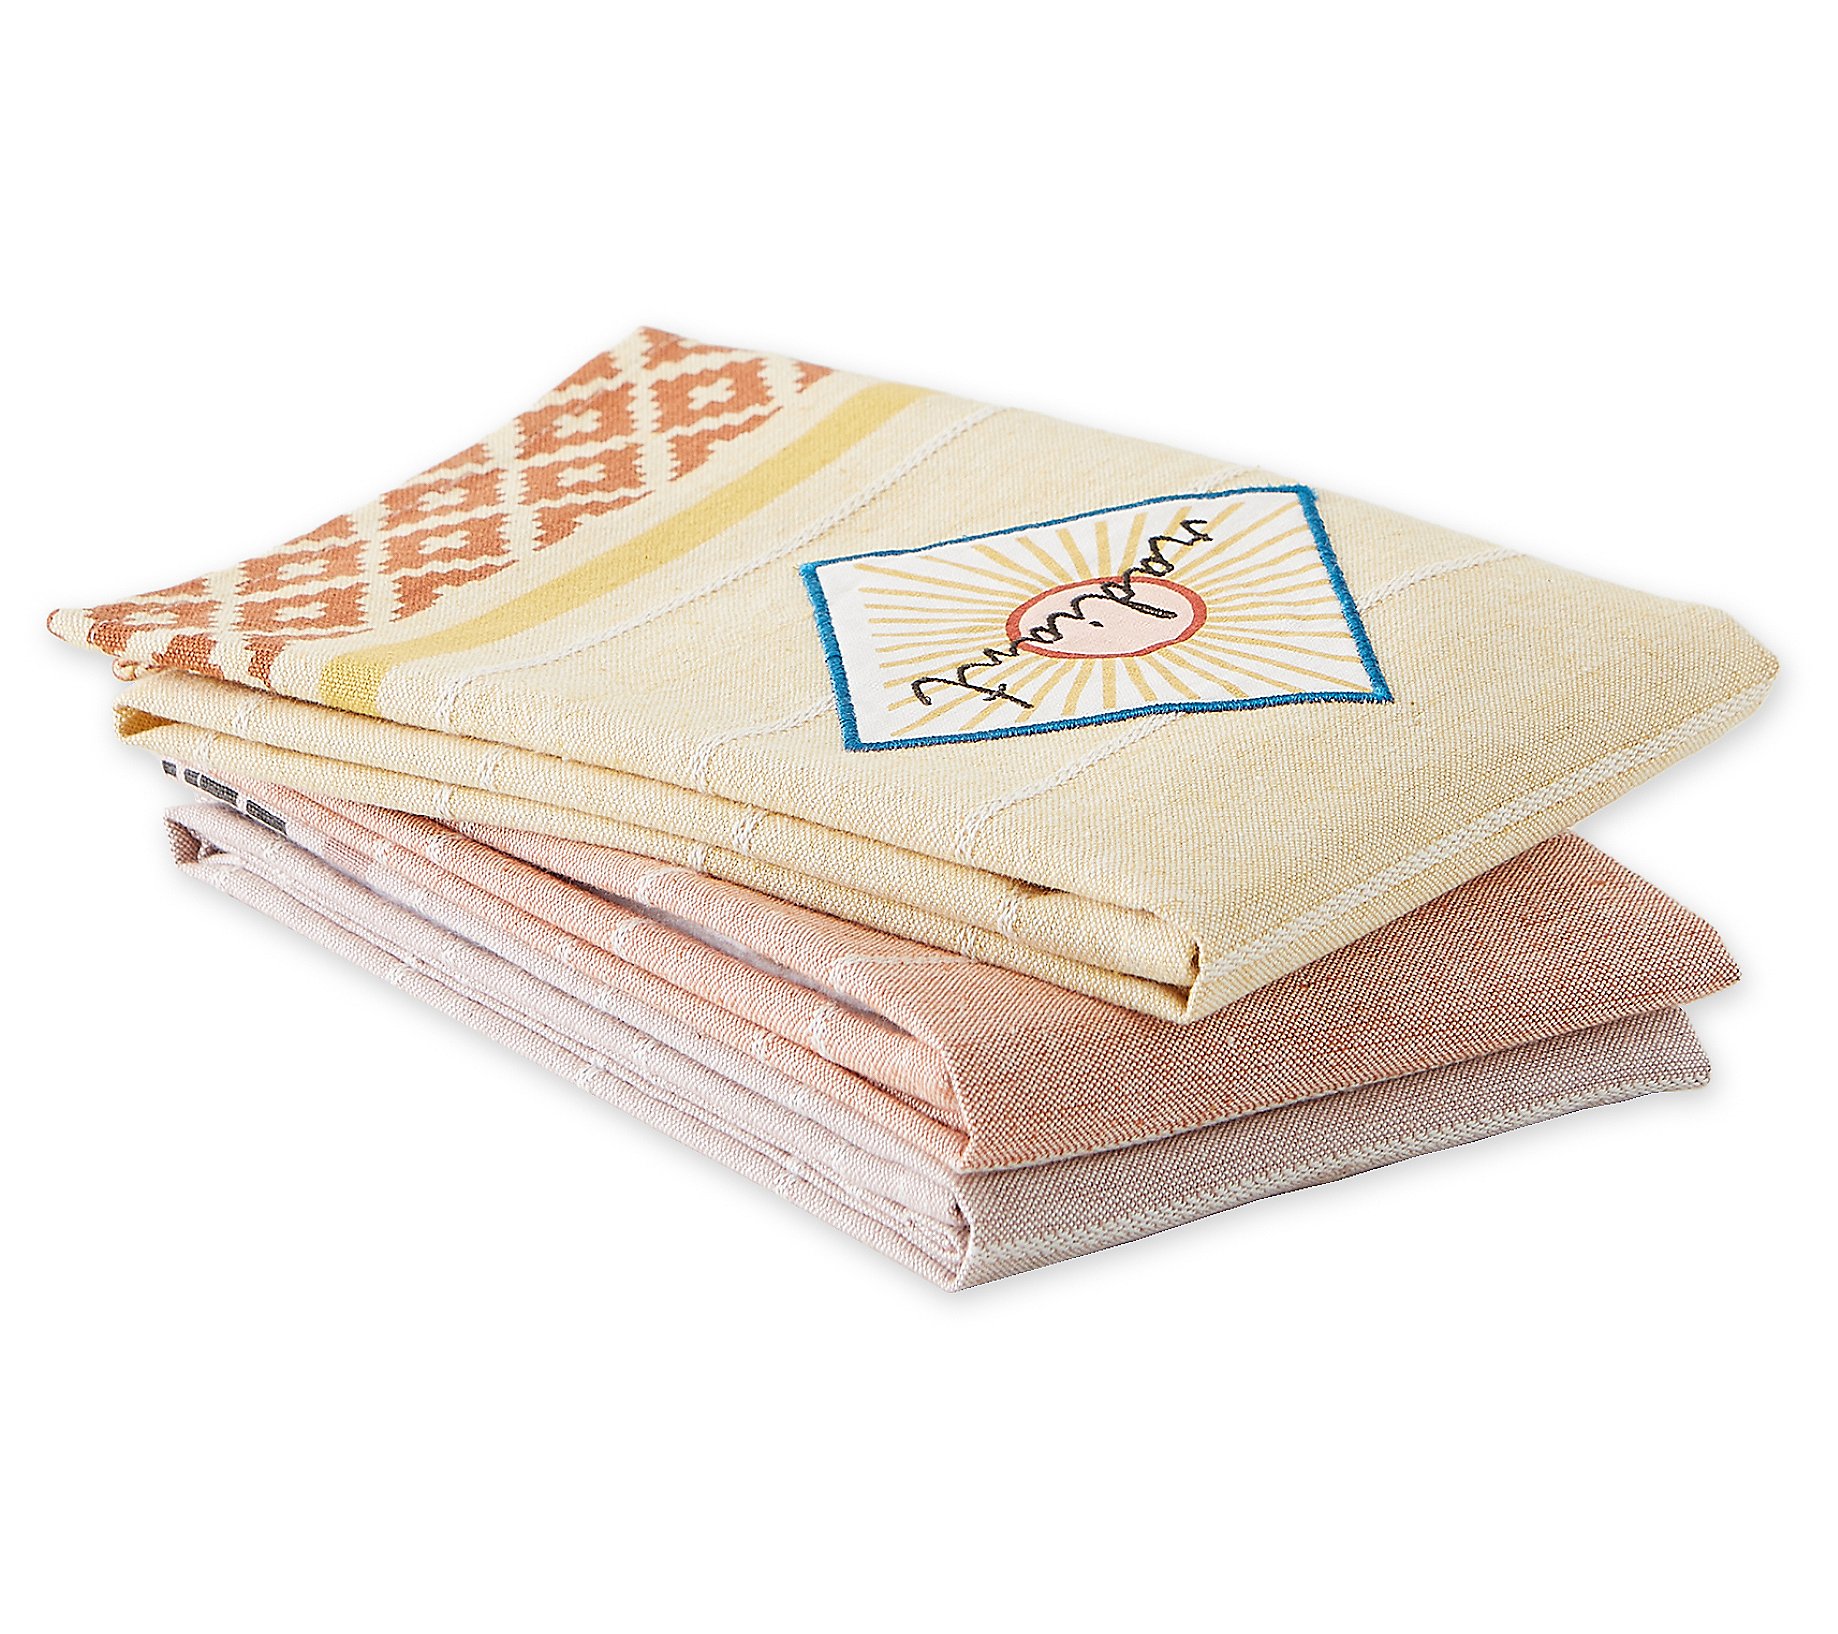 Design Imports Bungalow Printed Set of 3 Kitche n Towels